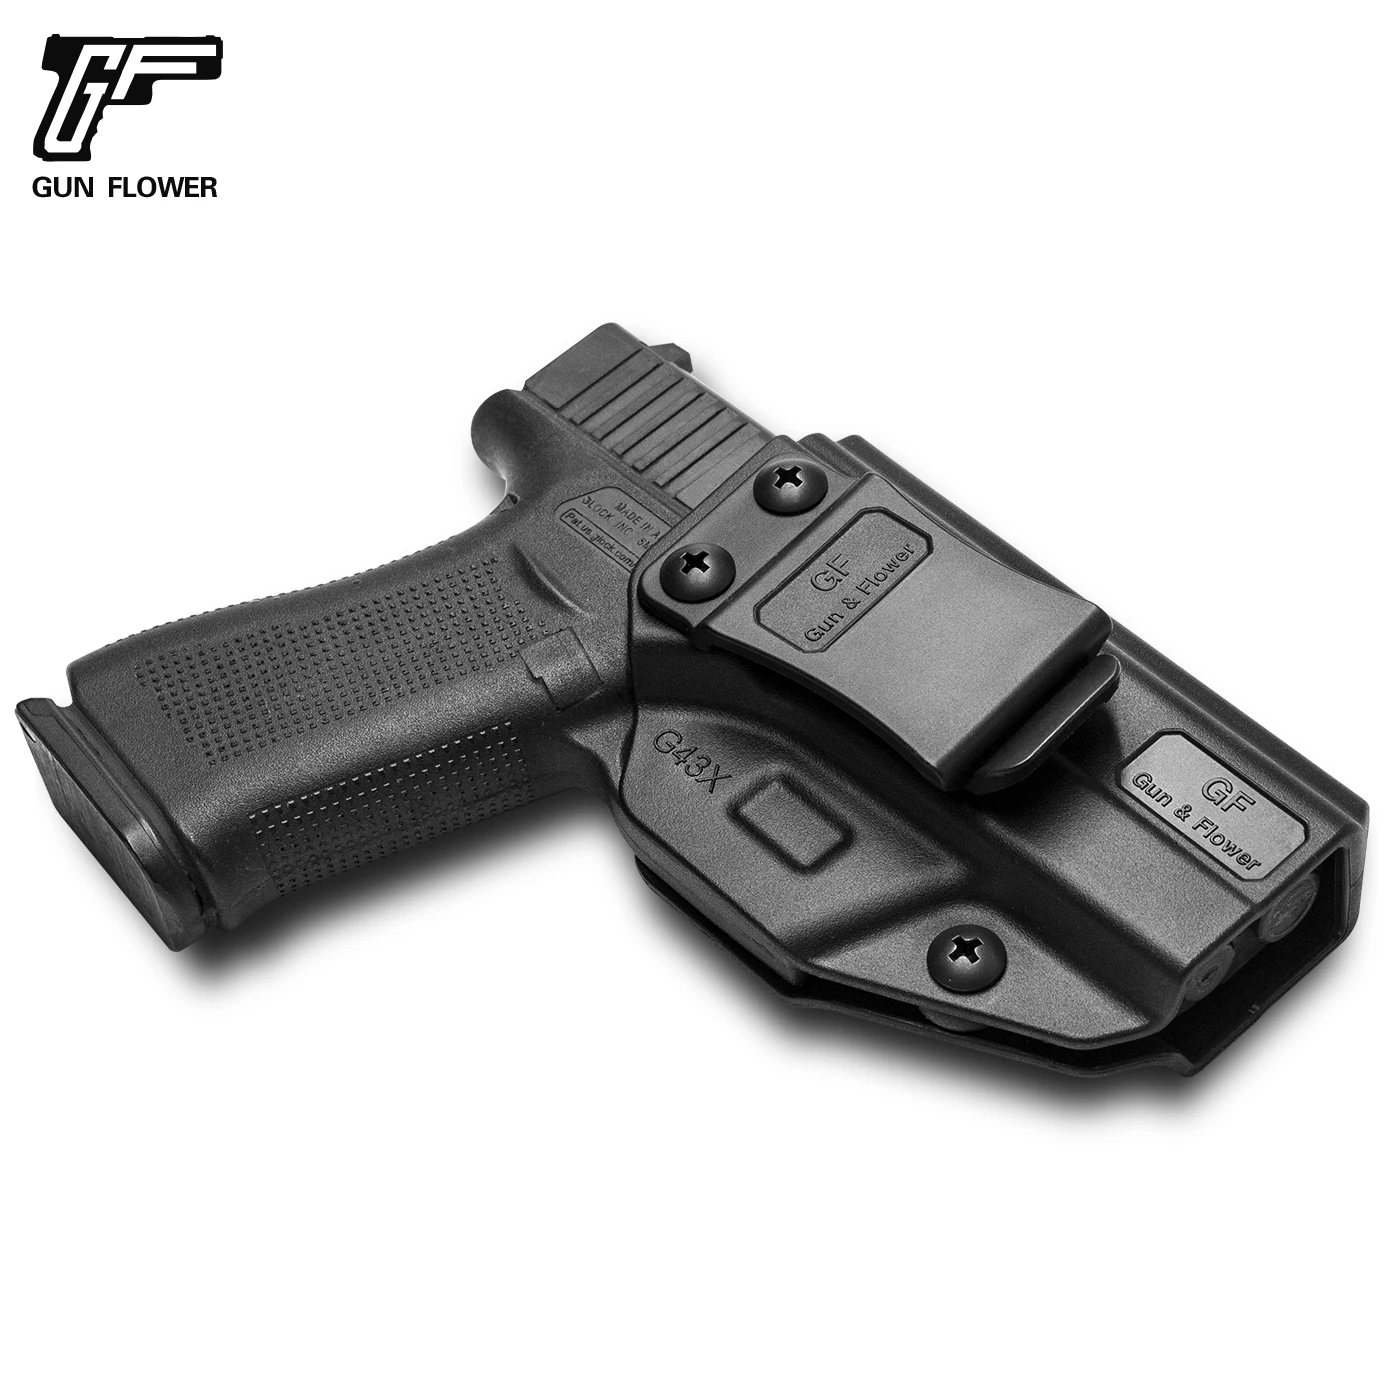  Compatible with Glock 43 G43x, Inside Waistband Carry Holster  Compatible with G43 G43x Pistol, 9mm Gun Holster for Men/Women Adj. Cant &  Retention, Polymer Fiber-Reinforced & Kydex Handmade Available 